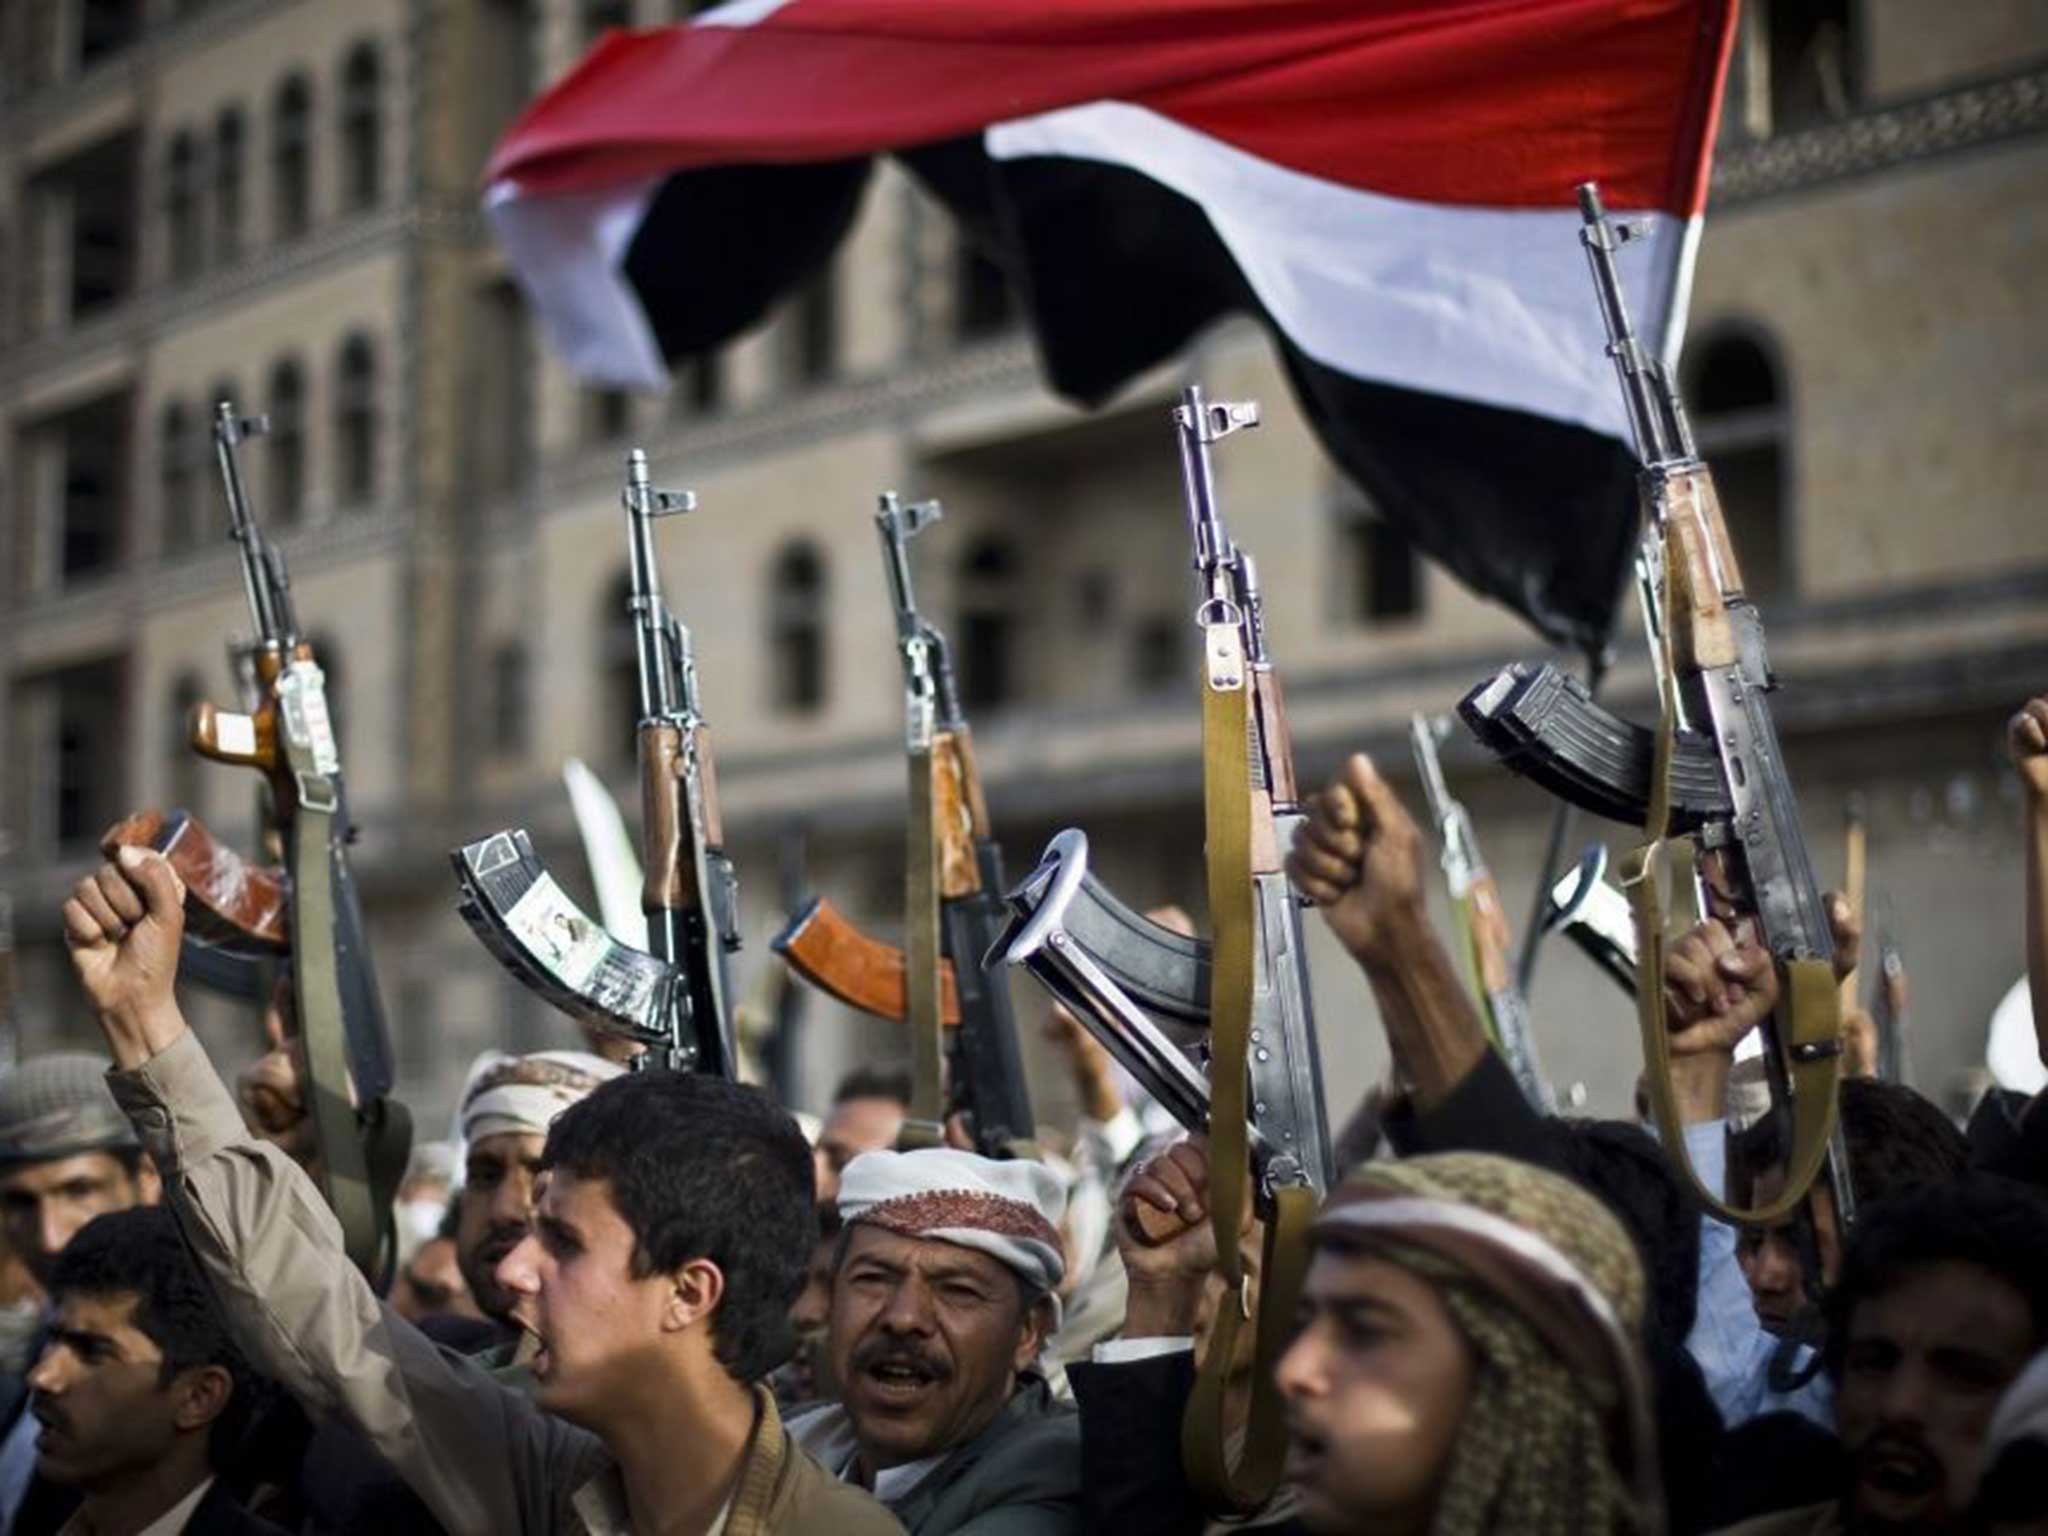 In Yemen, al-Qaeda in the Arabian Peninsula (AQAP) has seized its own airport and most of a province